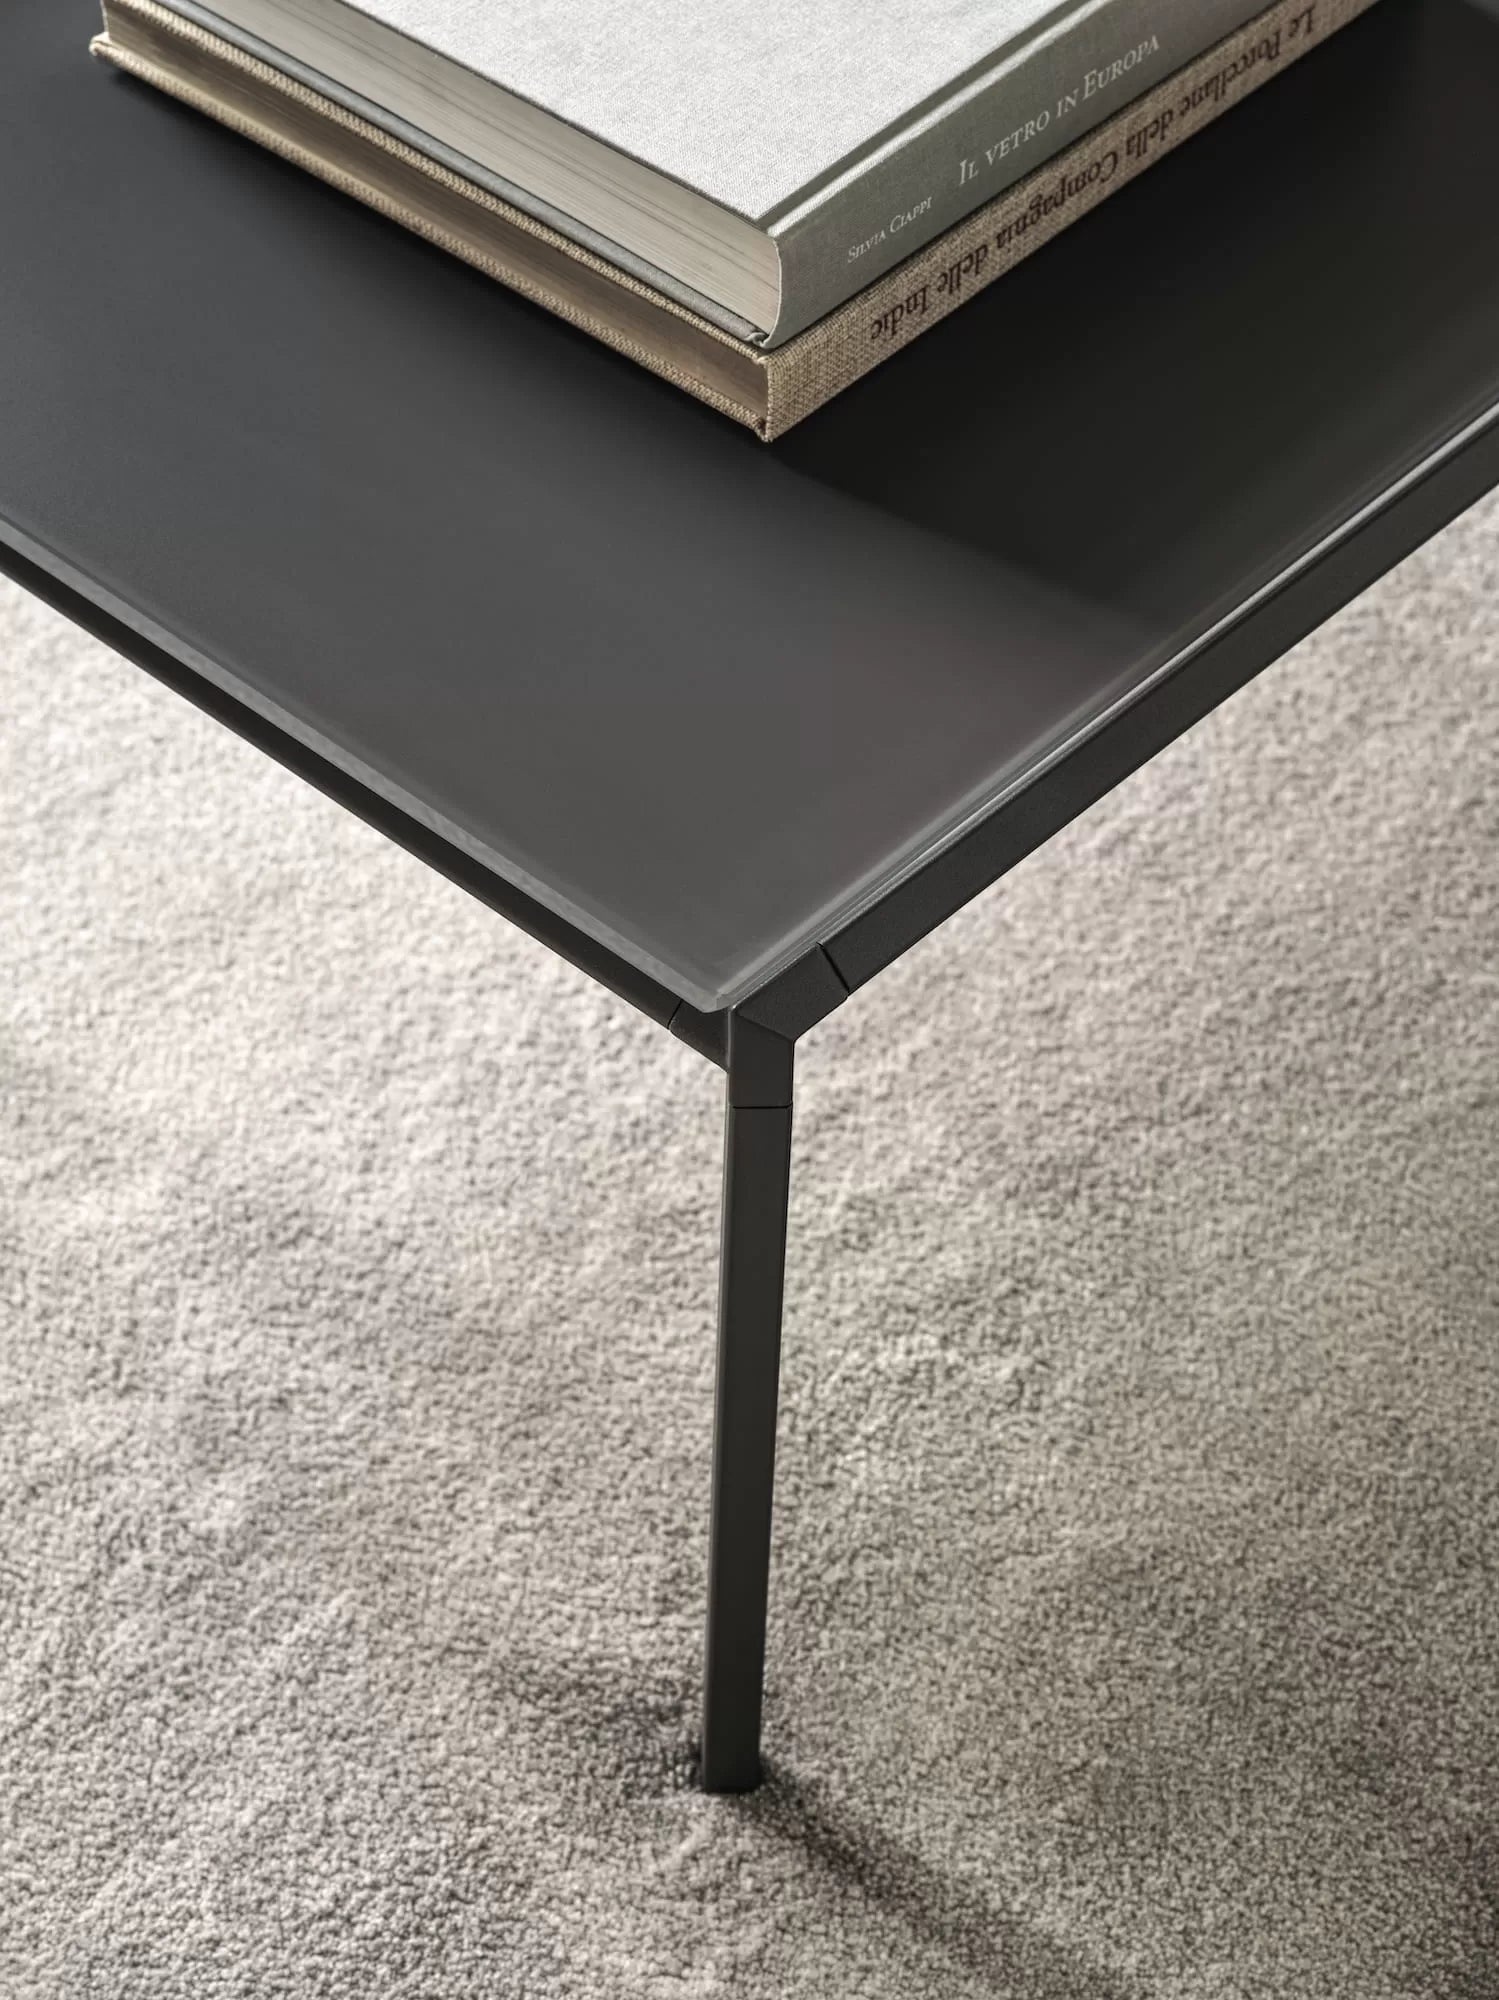 Diagonal Coffee Table With Lacquered Metal Frame 06 01